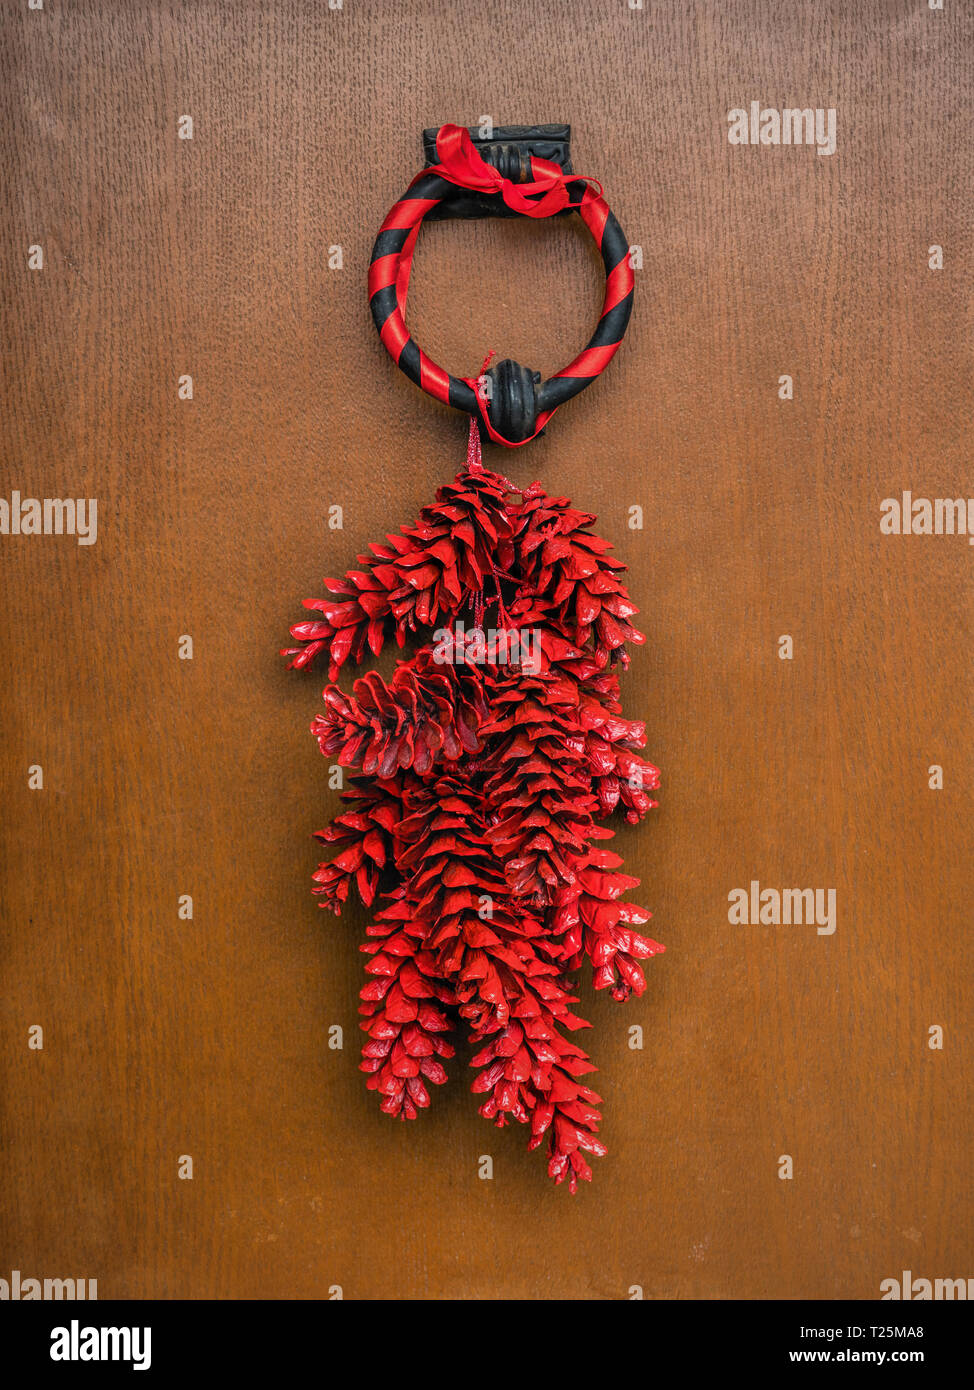 Red pinecone Christmas wreath attached to the wooden door Stock Photo